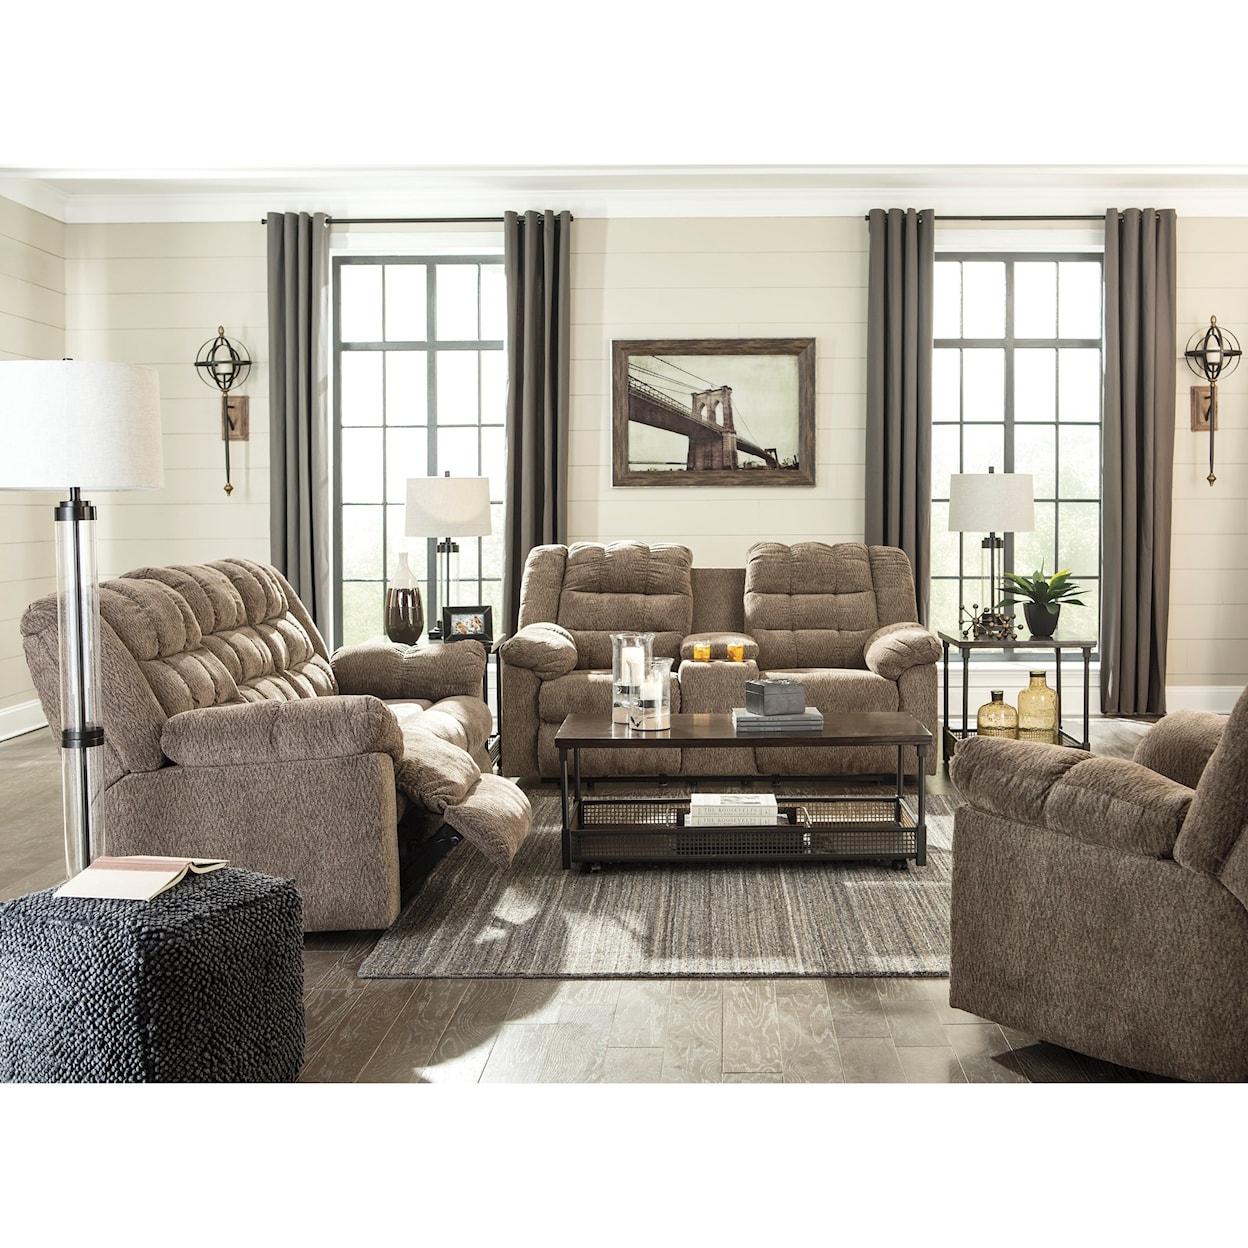 Signature Design by Ashley Workhorse Reclining Living Room Group